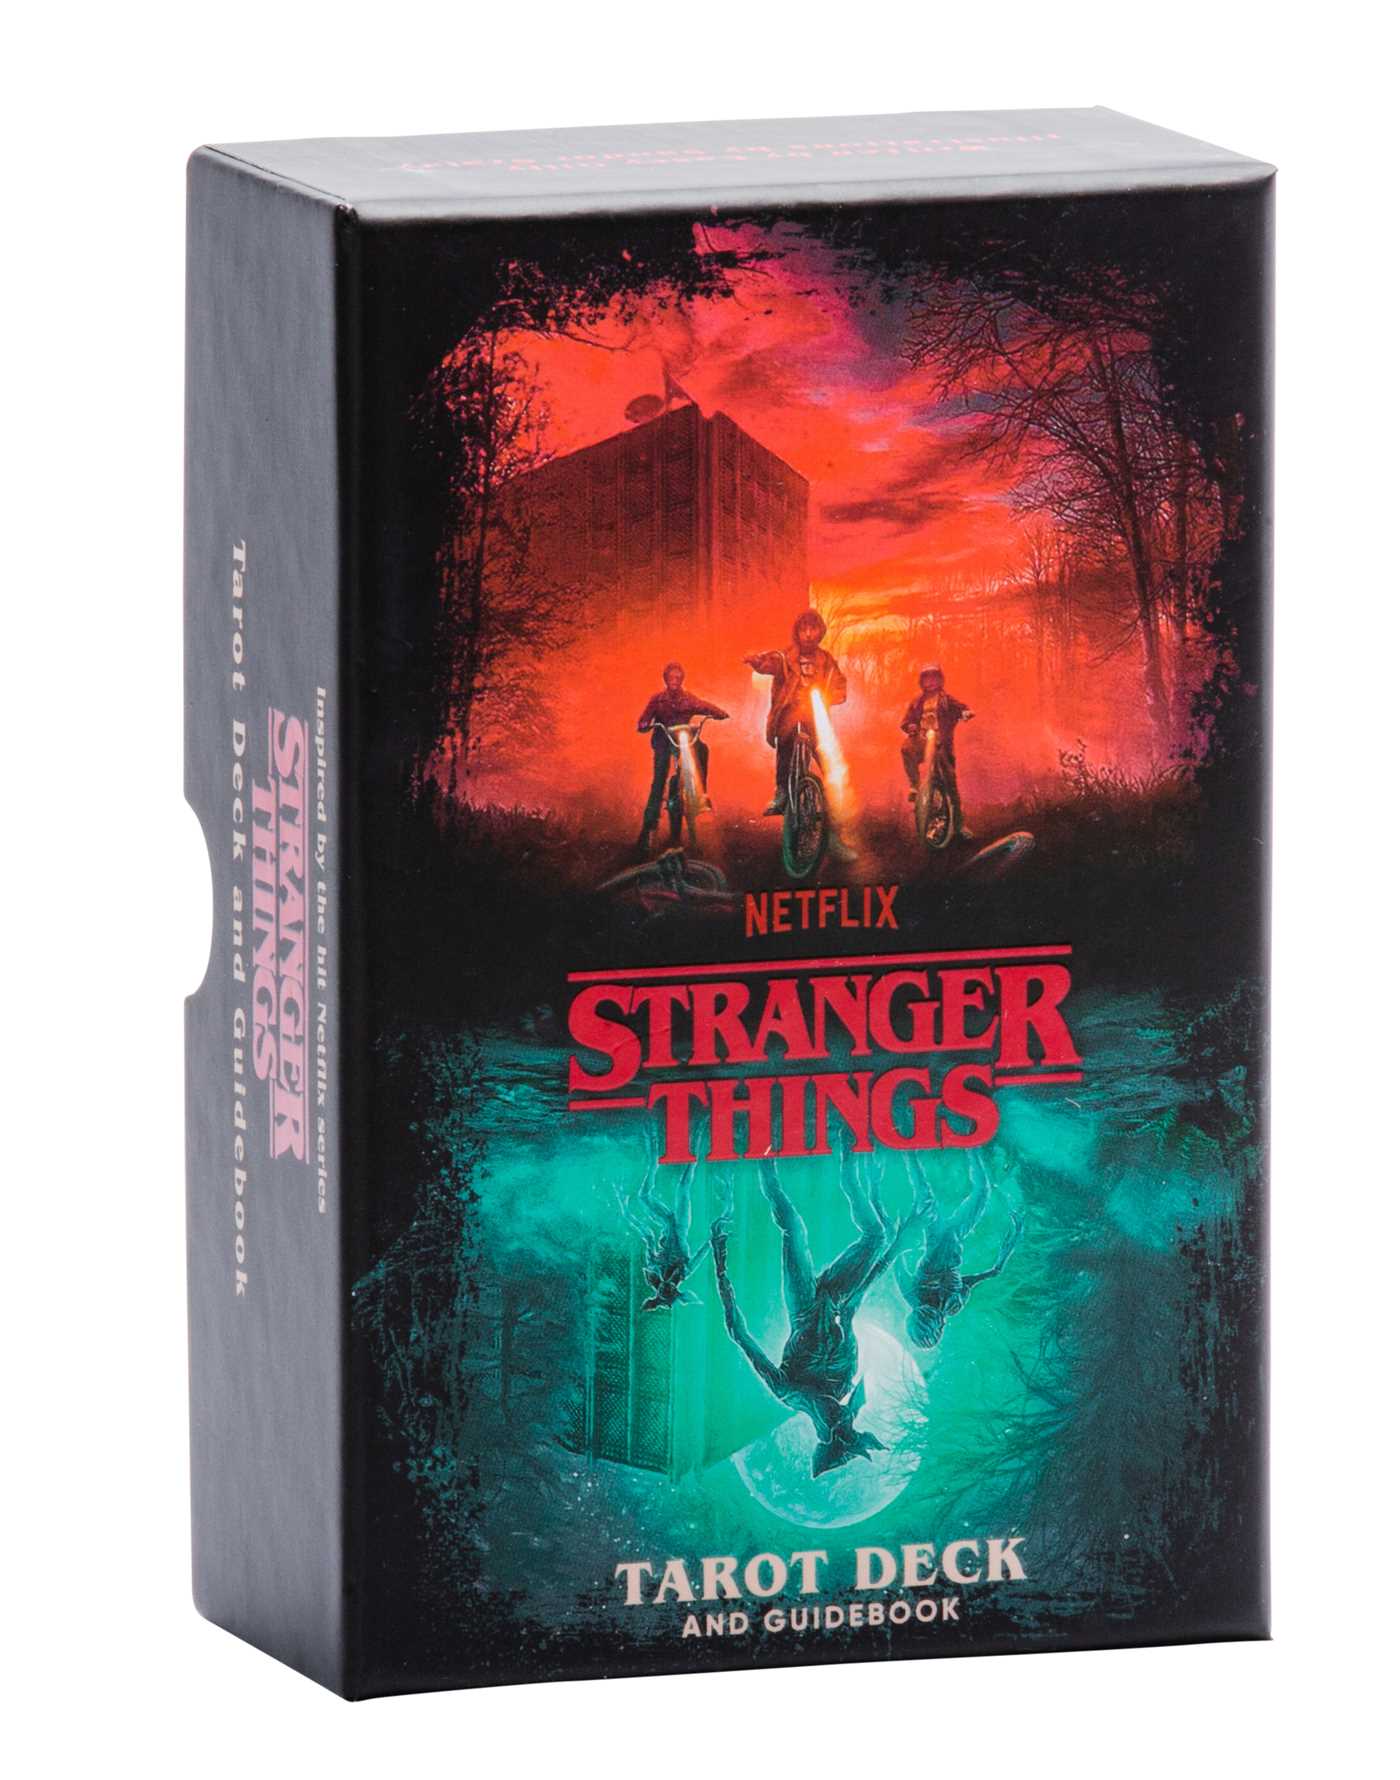 STRANGER THINGS TAROT DECK AND GUIDEBOOK, by INSIGHT EDITIONS